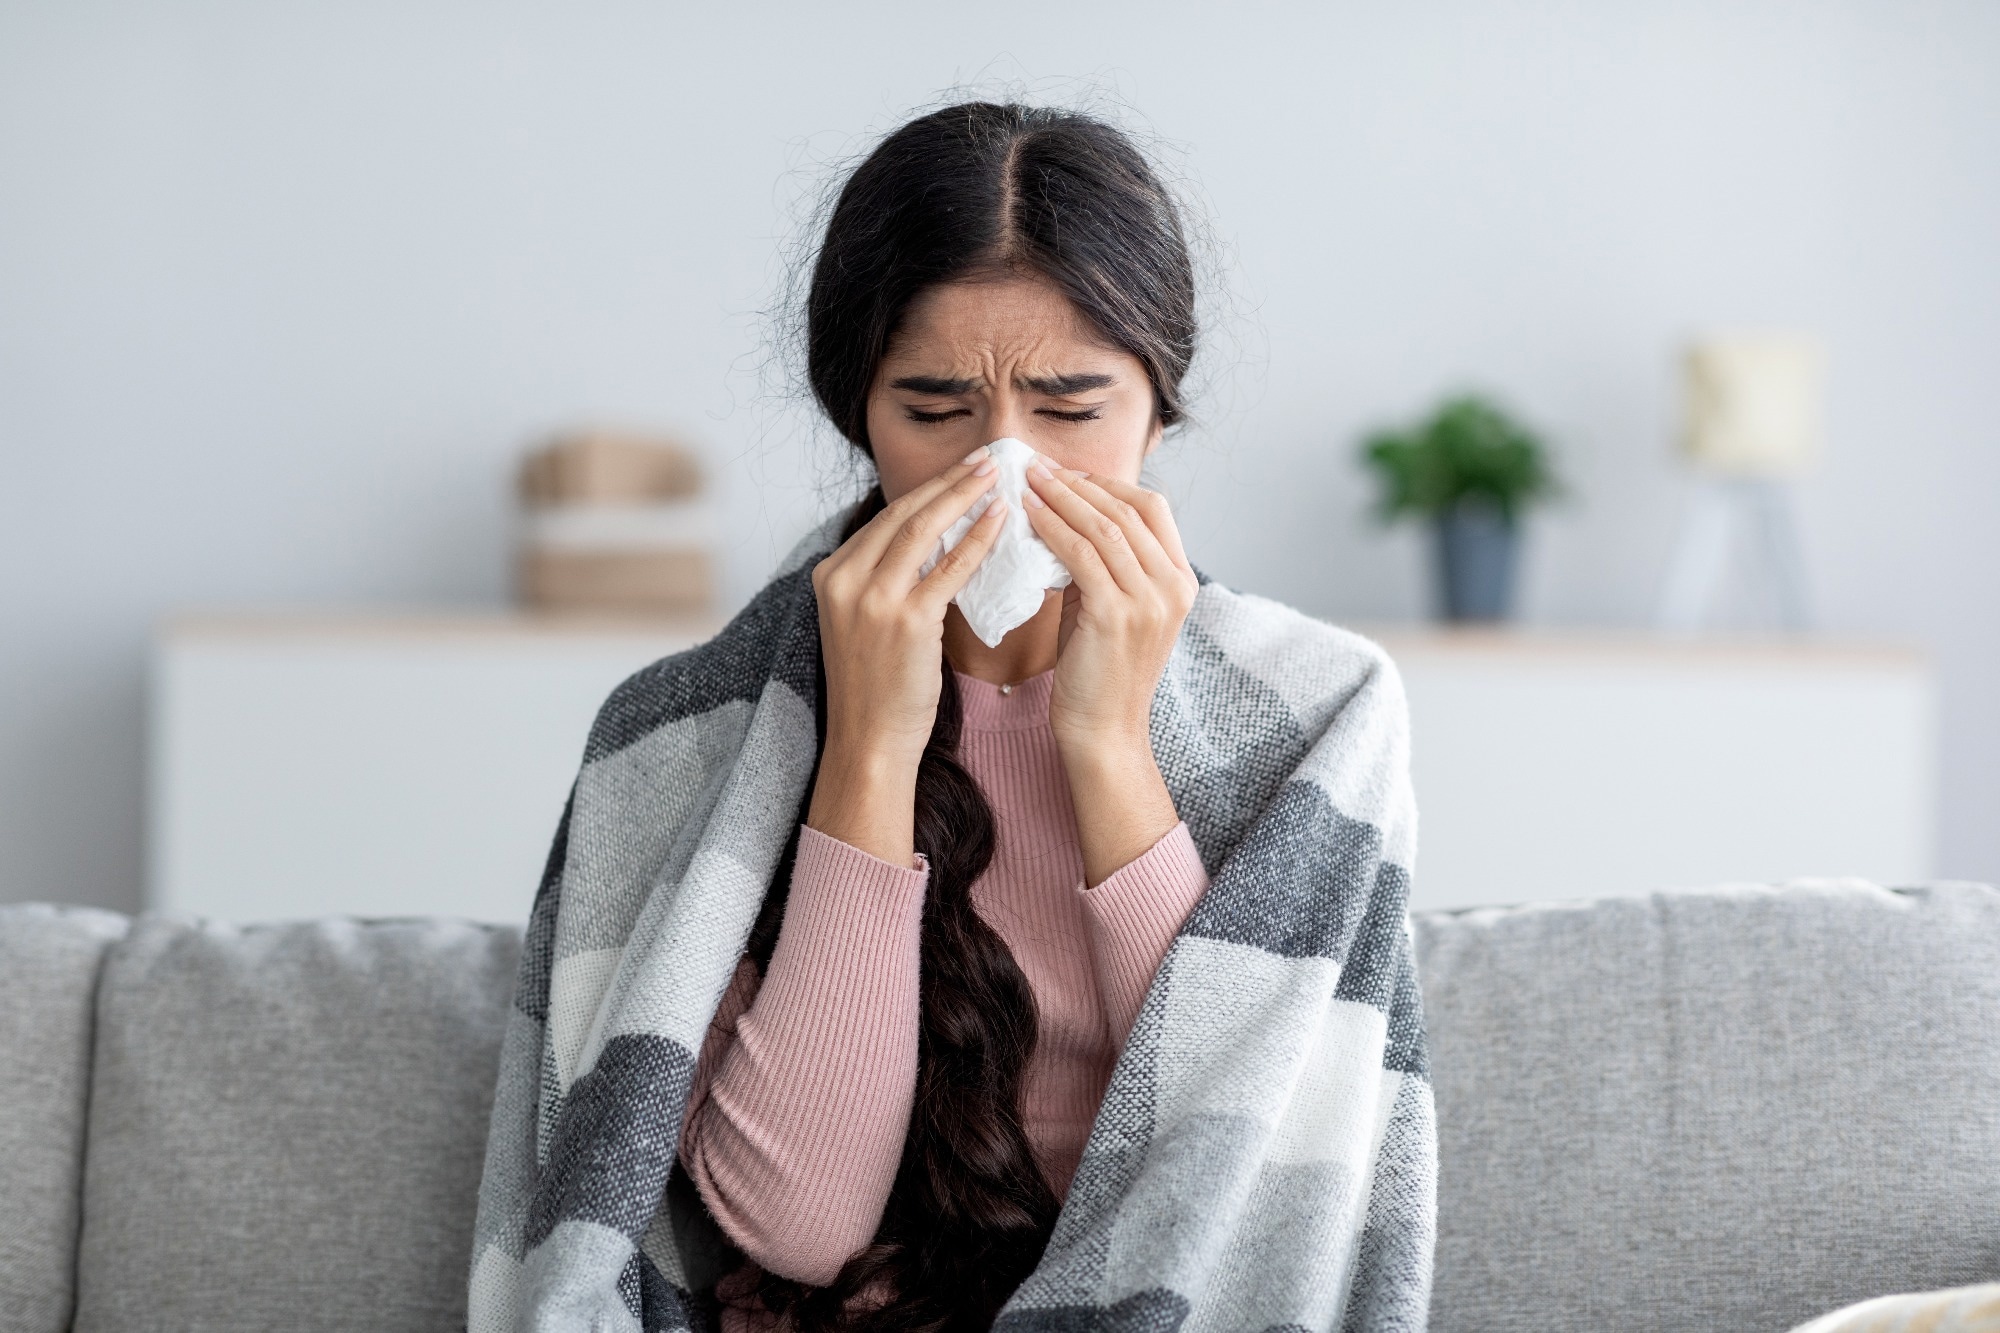 Study: Long-term symptom profiles after COVID-19 vs other acute respiratory infections: an analysis of data from the COVIDENCE UK study. Image Credit: Prostock-studio/Shutterstock.com